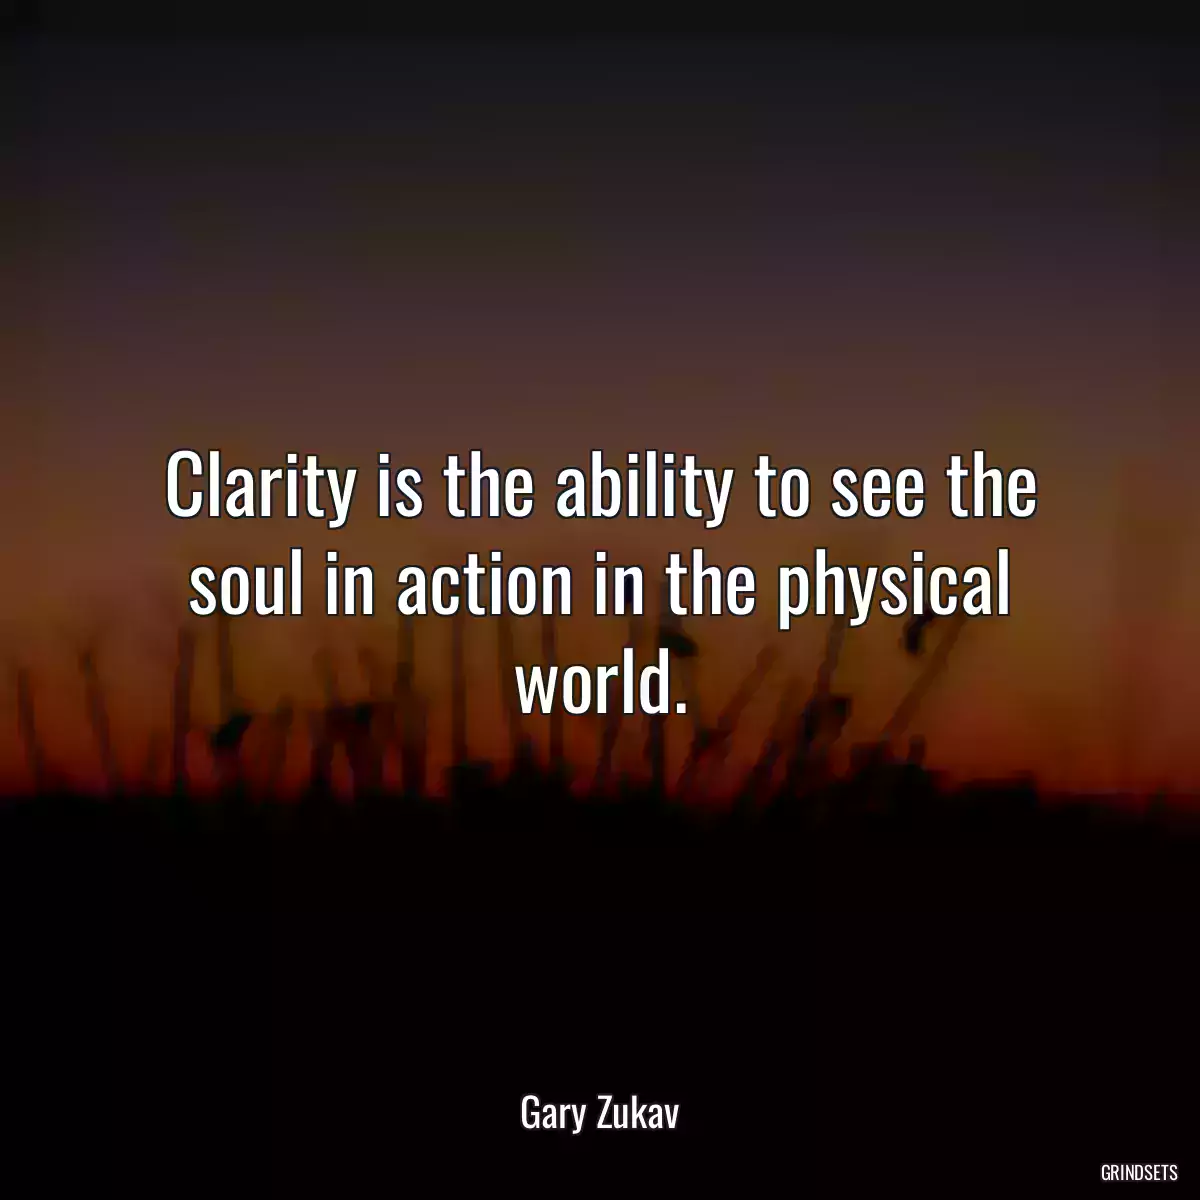 Clarity is the ability to see the soul in action in the physical world.